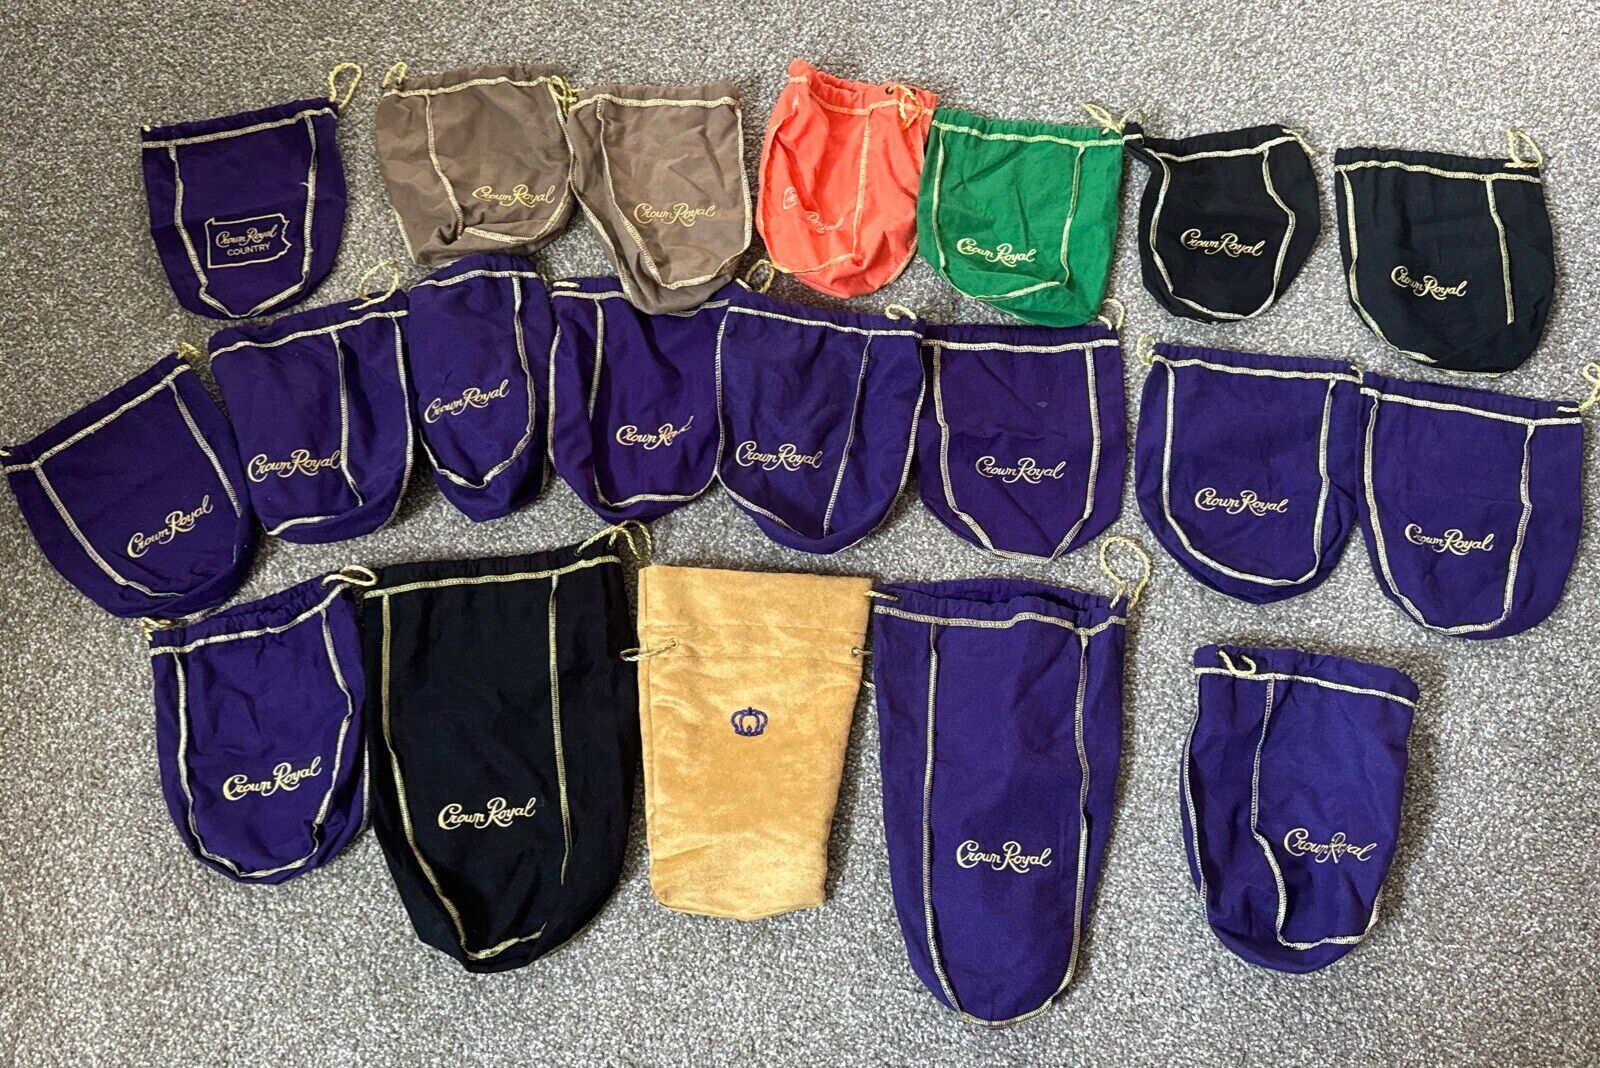 Lot of 20 👑 Crown Royal Bags Multiple Colors and Sizes 18 - 750 ML & 2 - 1.75L